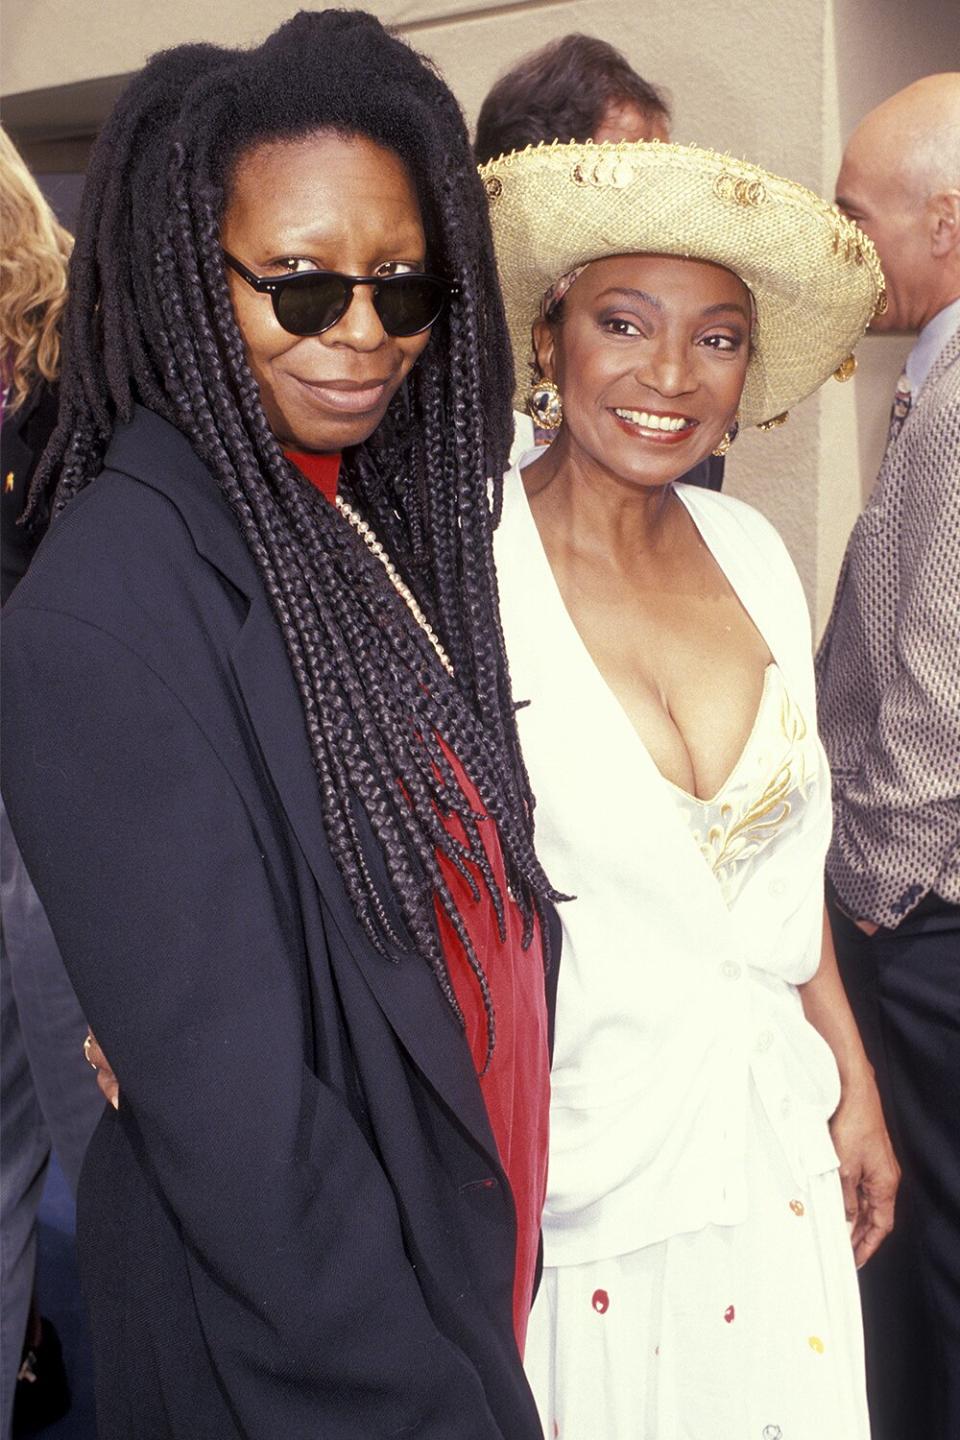 Actresses Nichelle Nichols and Whoopi Goldberg attending 25th Anniversary Party for Star Trek on June 6, 1991 at Paramount Studios in Hollywood, California.